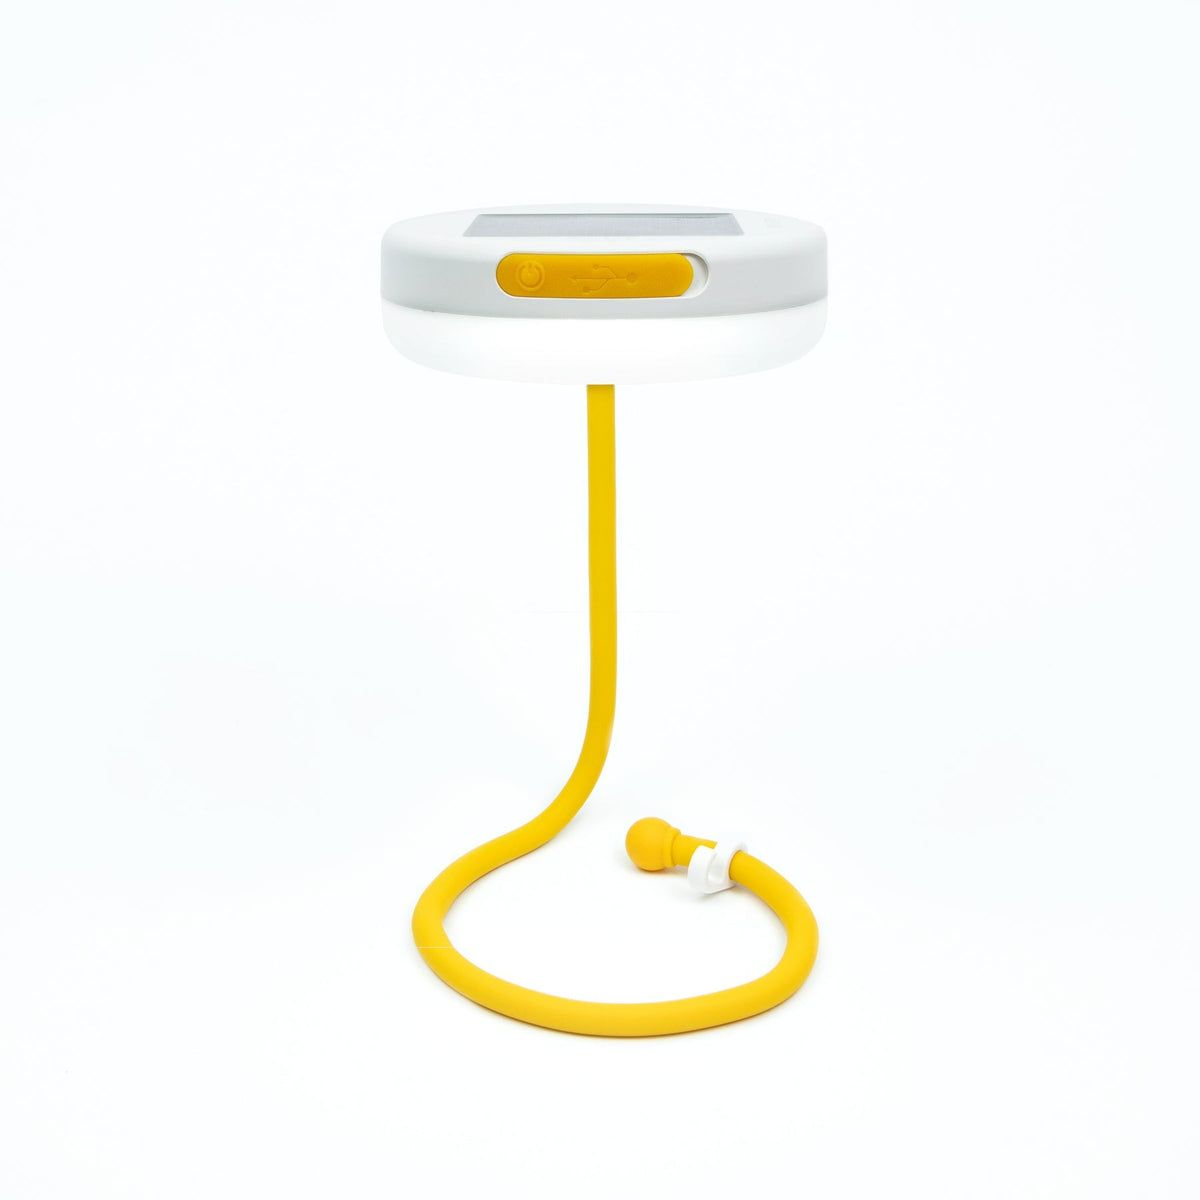 Luci Core Utility Solar Light standing vertically